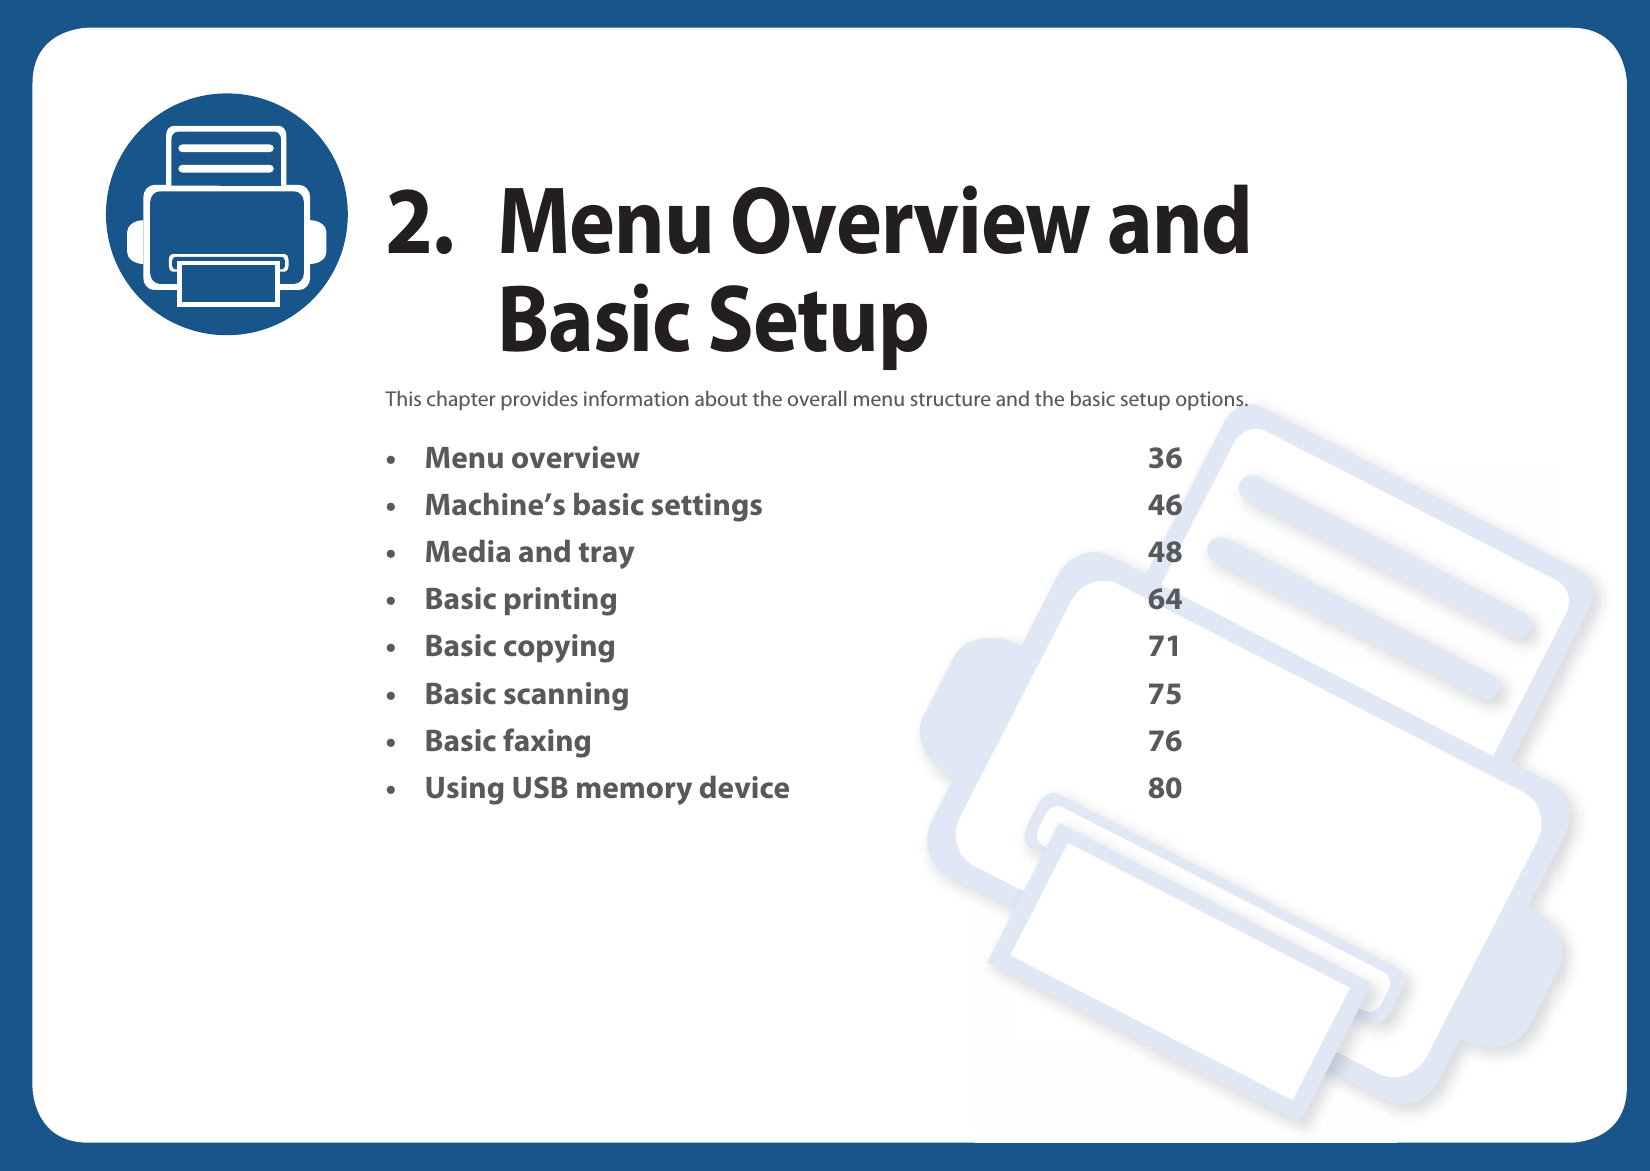 2. Menu Overview and Basic SetupThis chapter provides information about the overall menu structure and the basic setup options.• Menu overview 36• Machine’s basic settings 46• Media and tray 48• Basic printing 64• Basic copying 71• Basic scanning 75• Basic faxing 76• Using USB memory device 80